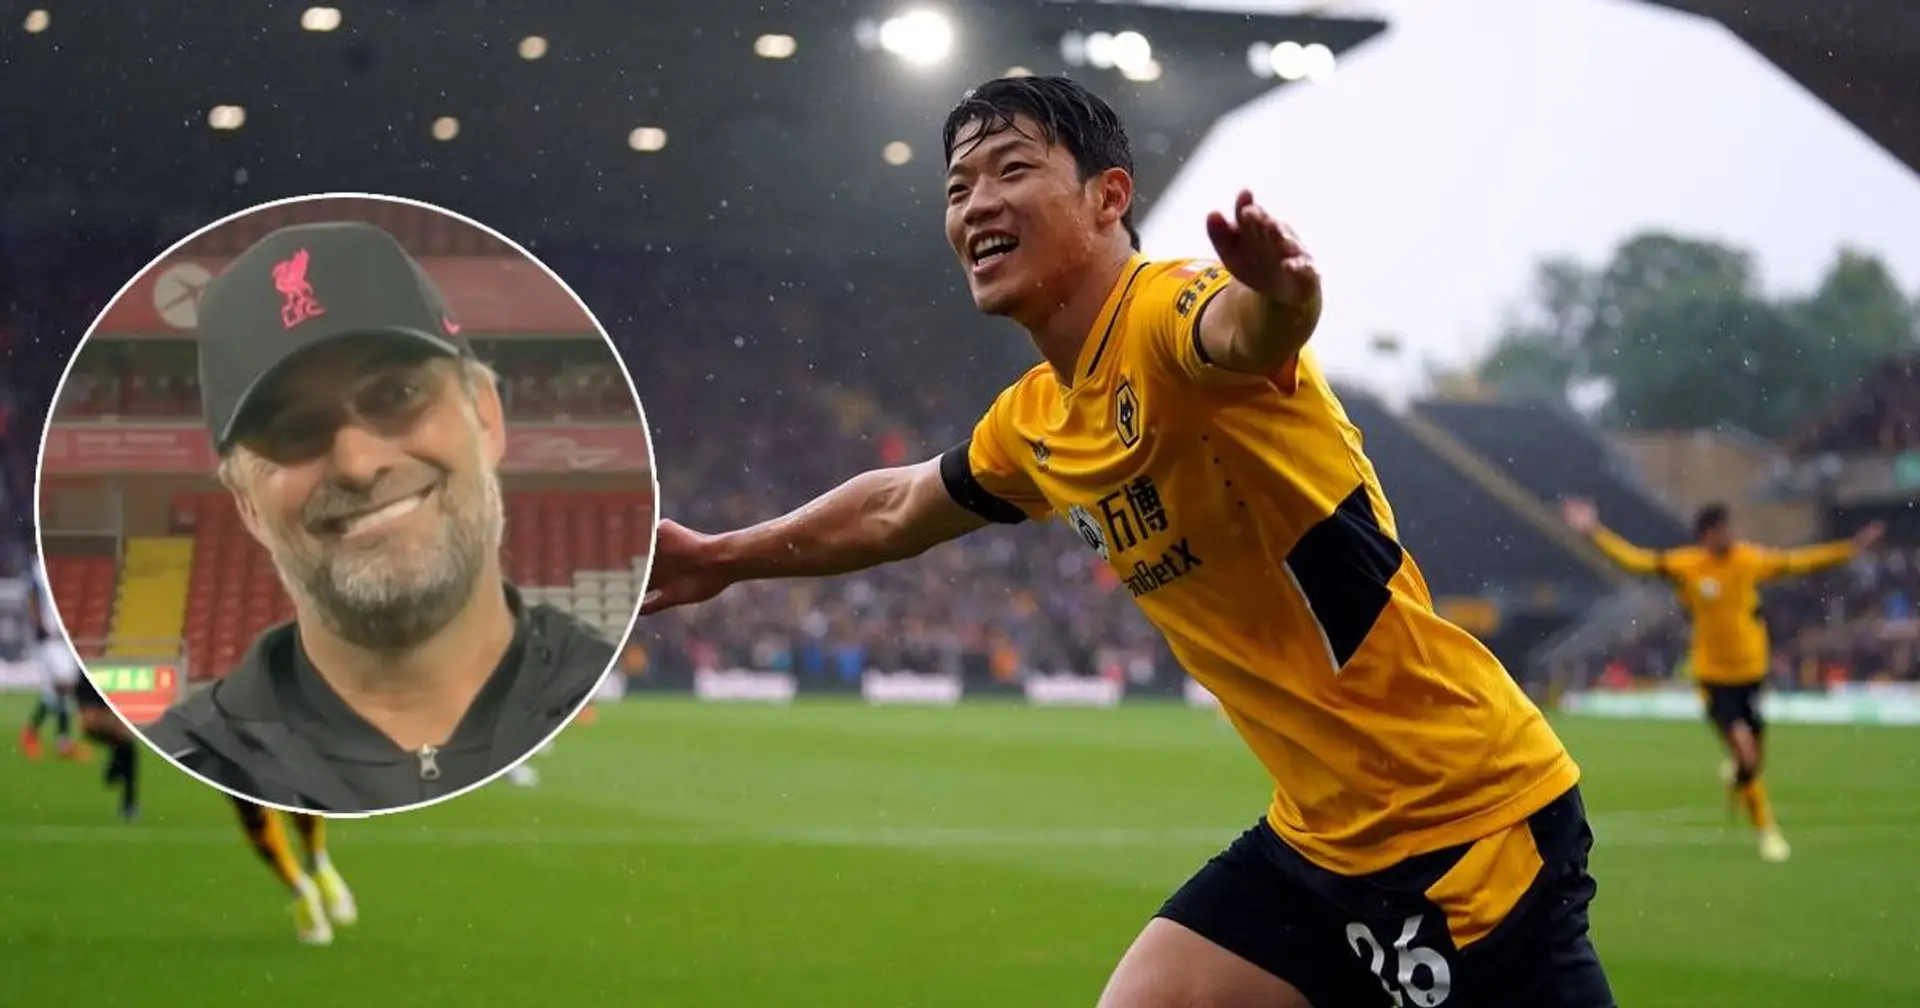 Reds interested in on-loan Wolves forward Hwang who turned down Anfield move in 2020 (reliability: 3 stars)